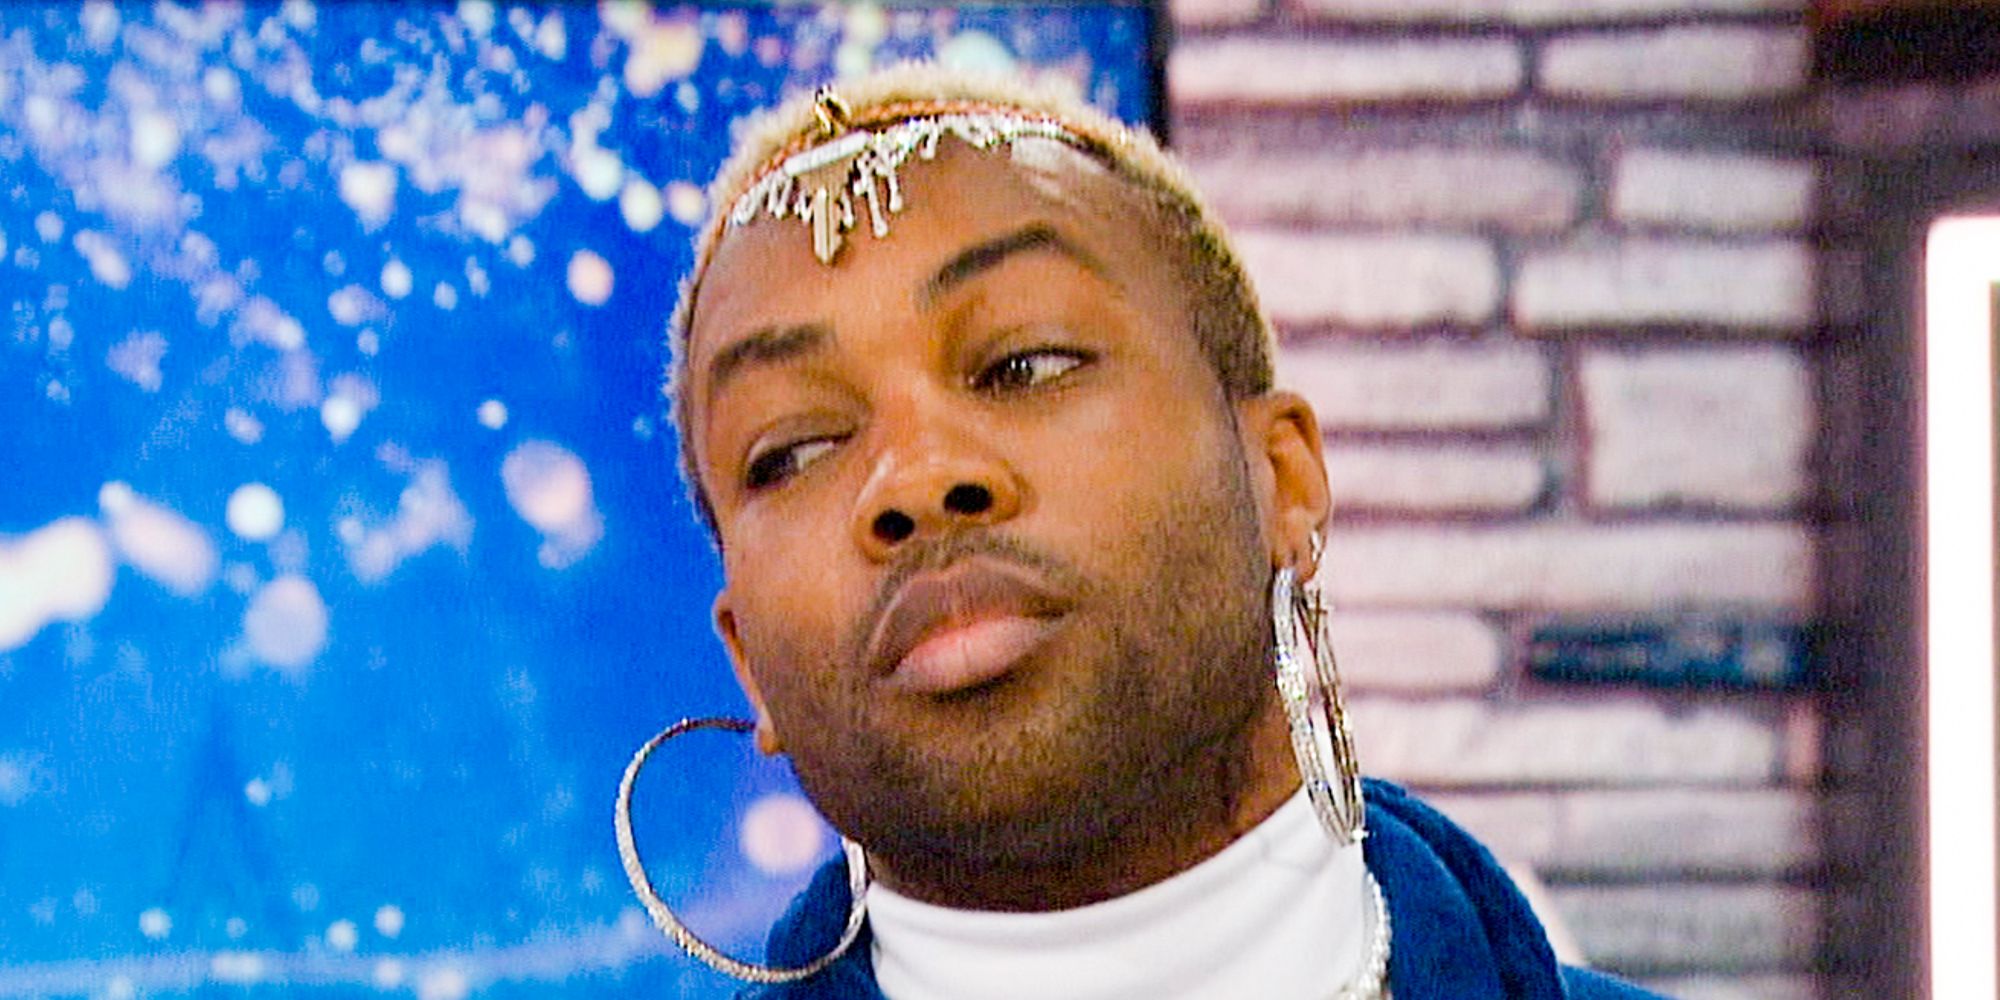 Todrick Hall on Celebrity Big Brother 3 as Head of Household